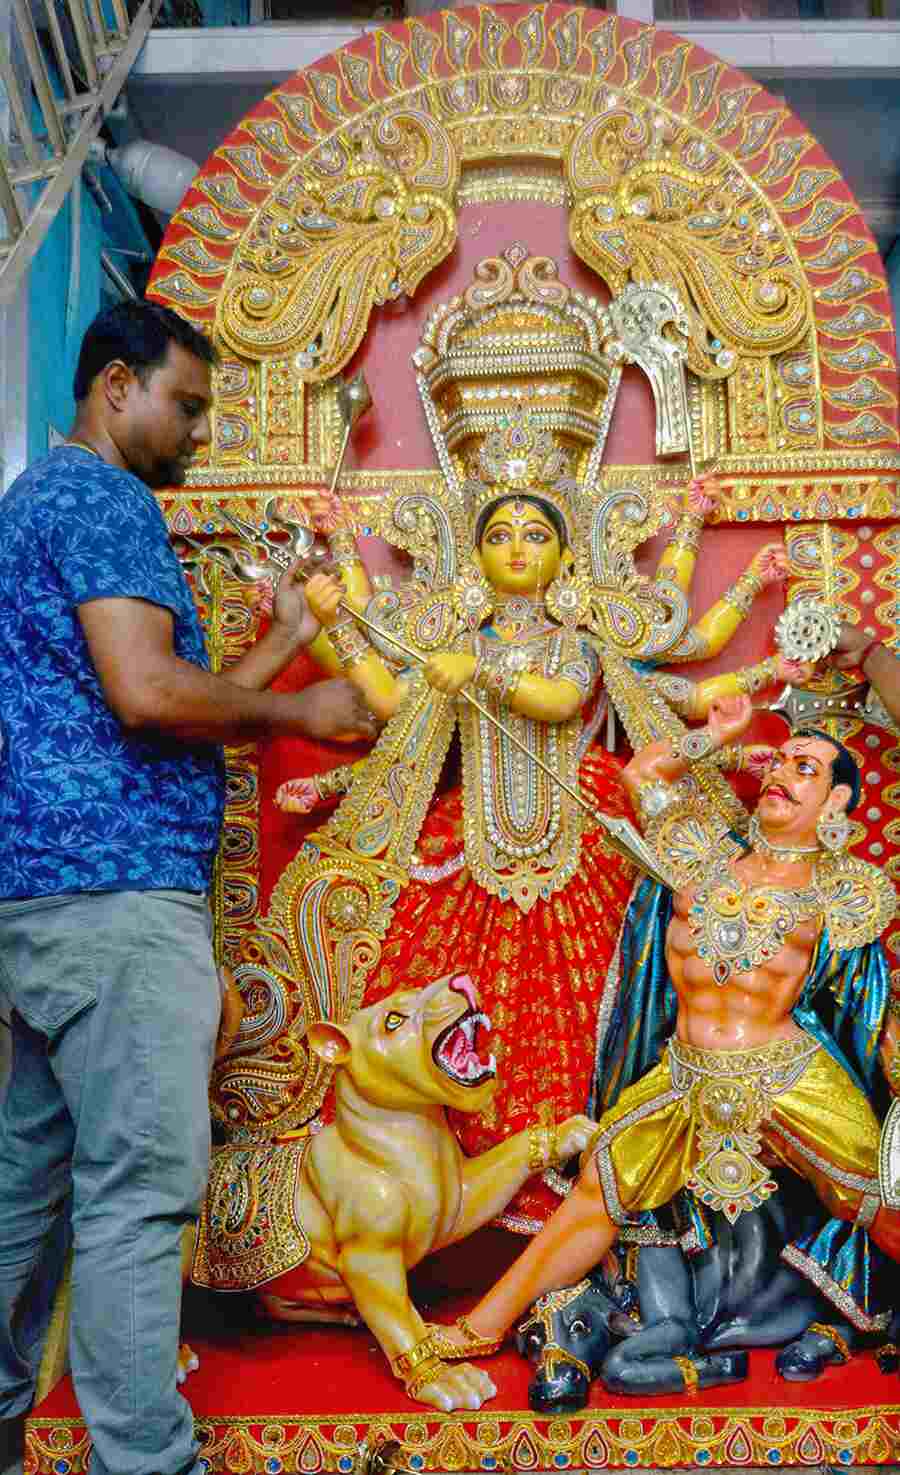 With 138 days to go for Durga Puja, idol-makers at Kumartuli are already busy completing Durga idols to send off to faraway lands. In picture, artist Kaushik Ghosh puts the finishing touches to an idol that will be travelling to London  